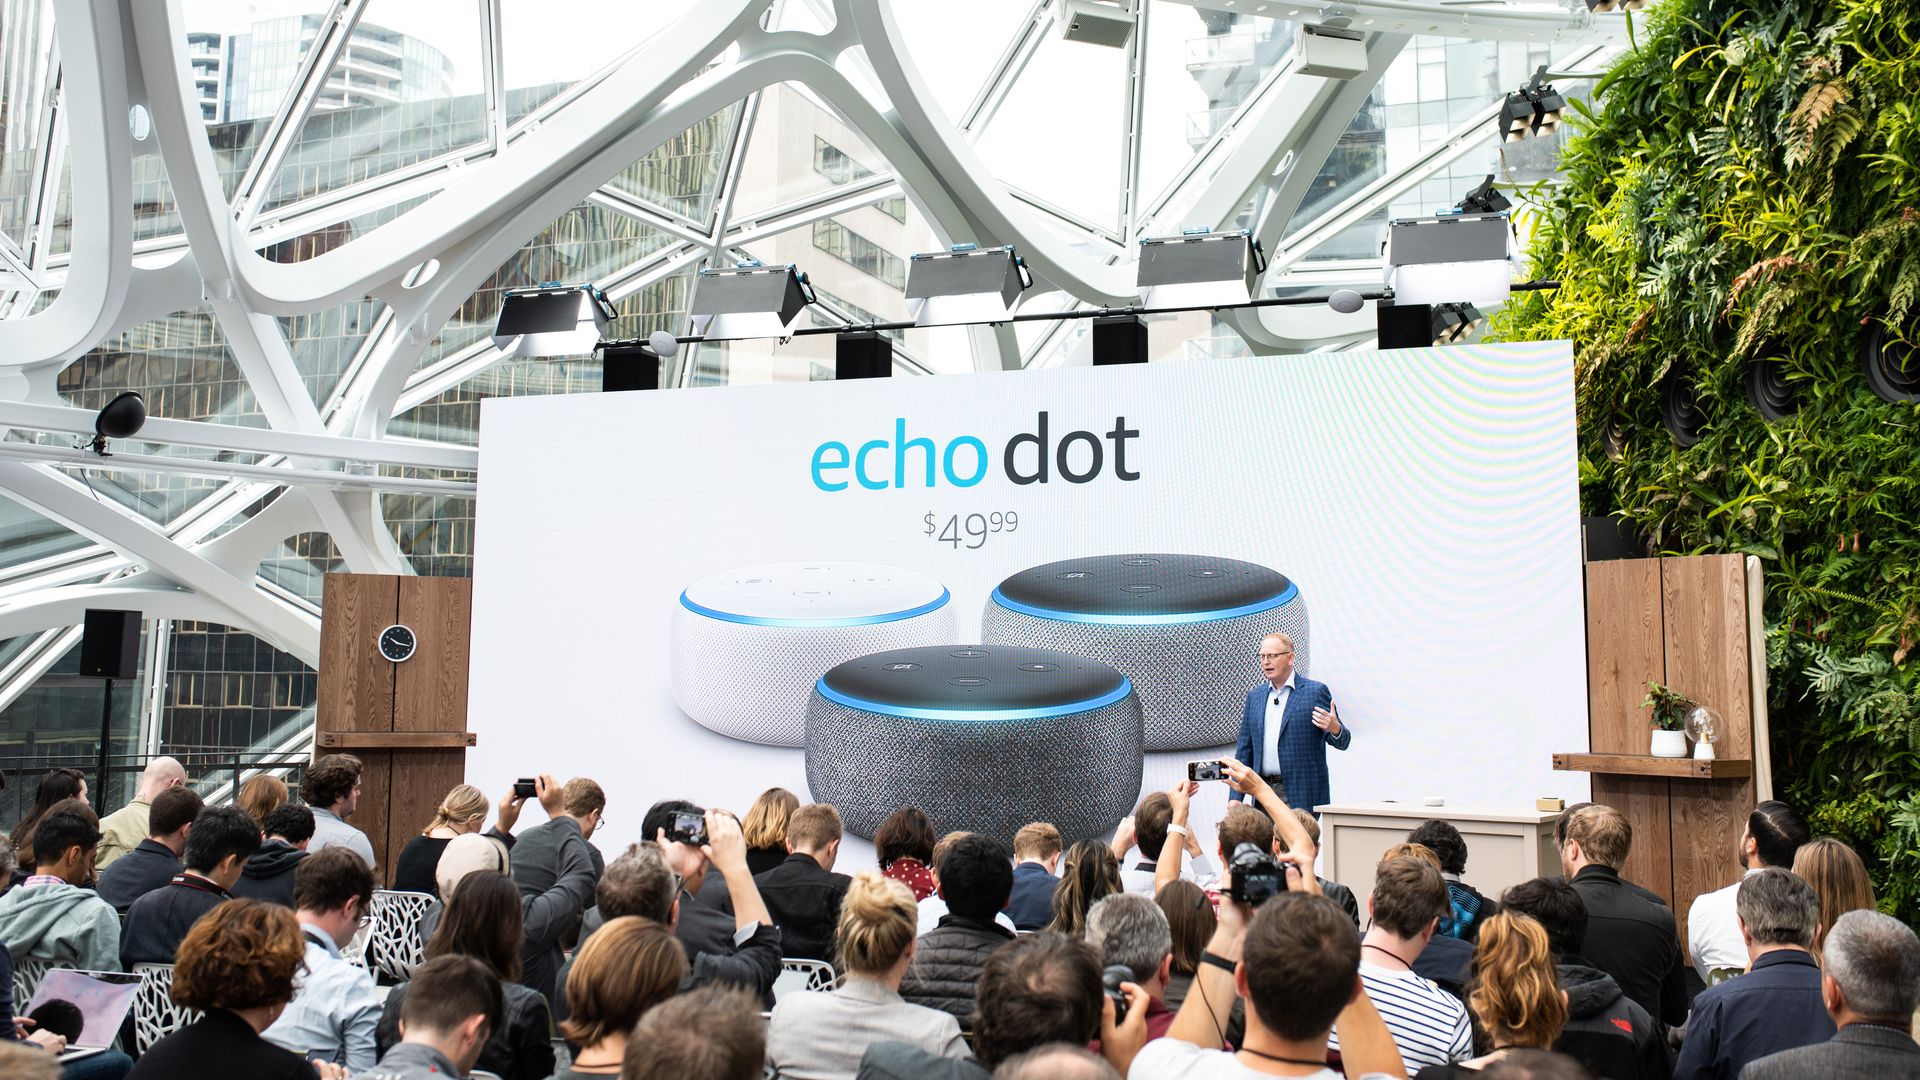 In this image, a crowd surrounds a stage that supports a large Amazon Echo Dot advertisement. 